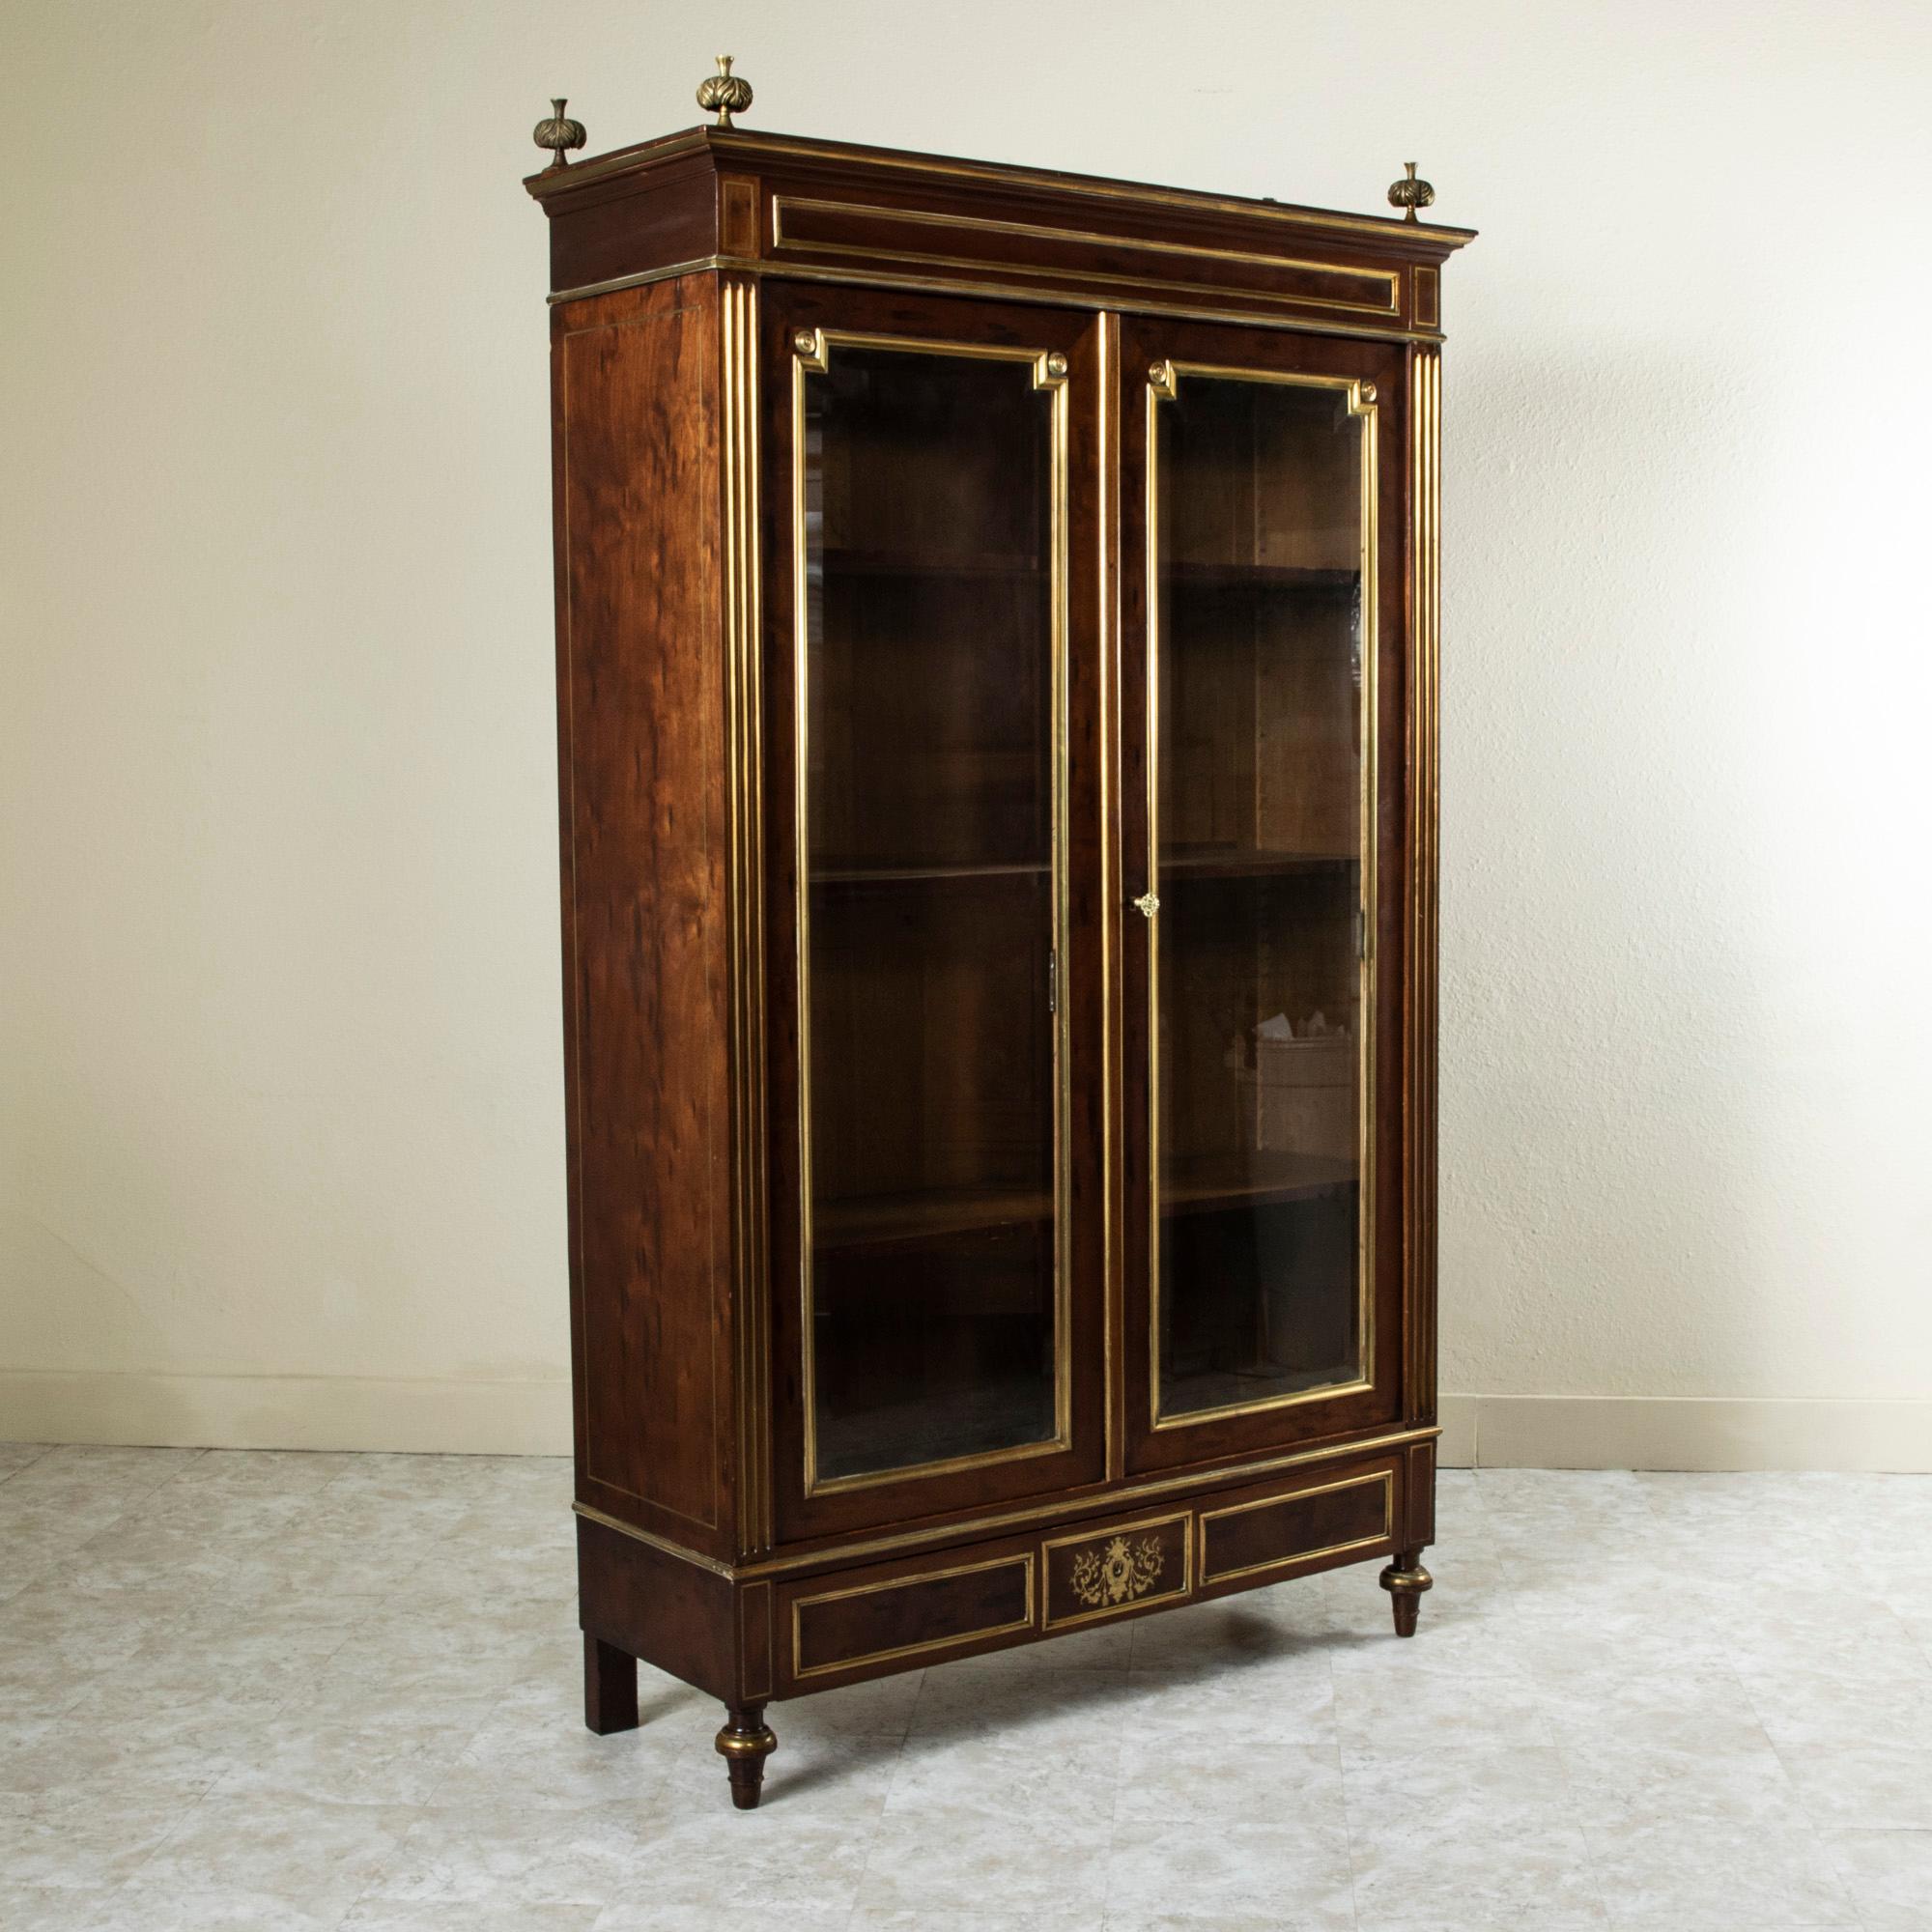 This late nineteenth century Louis XVI mahogany Bibliotheque or bookcase is finished in stunning bronze banding. Bronze-fluted corners flank its two beveled glass doors. The doors open to reveal an interior fitted with four adjustable interior